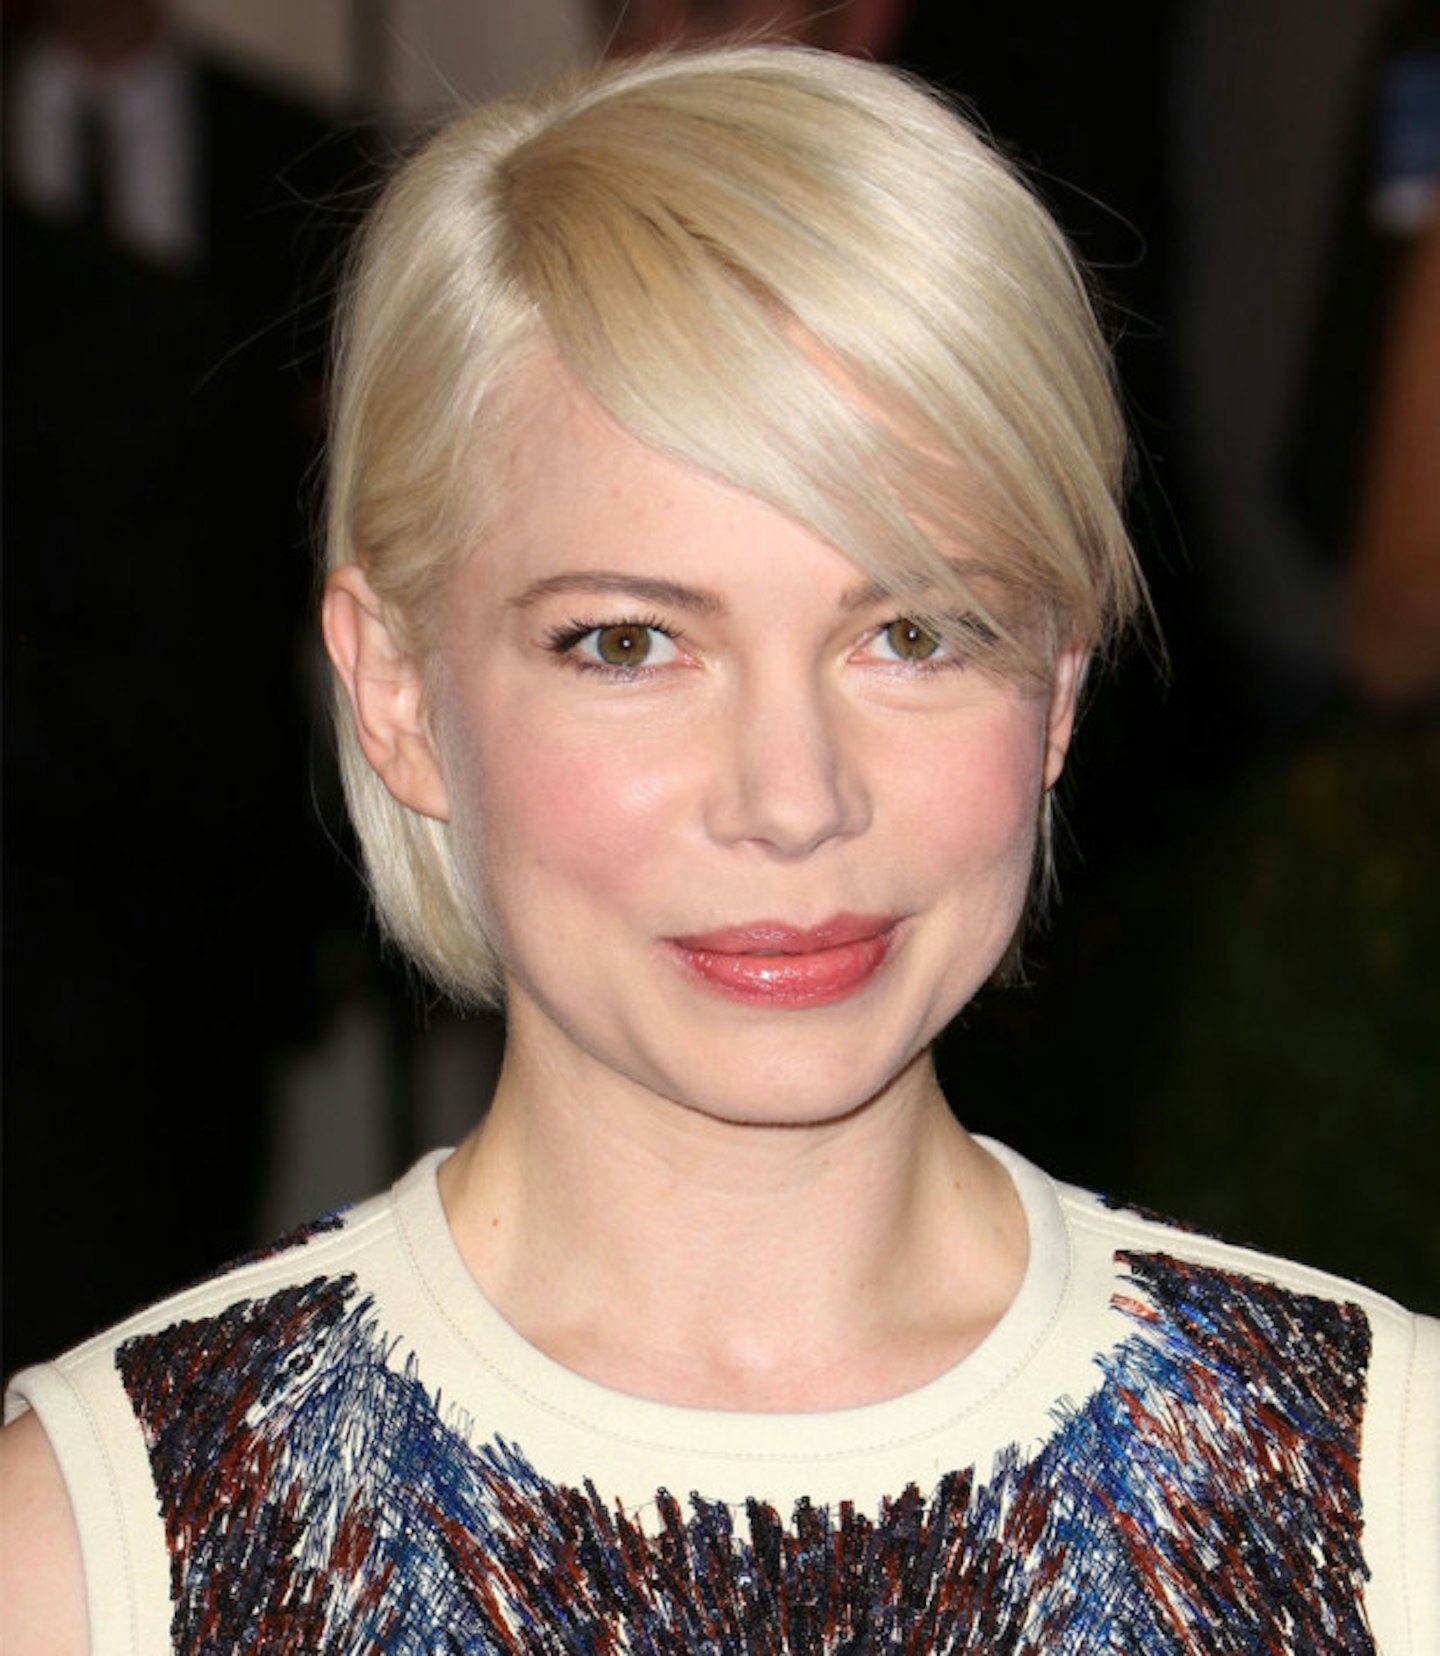 Michelle Williams' icy blonde